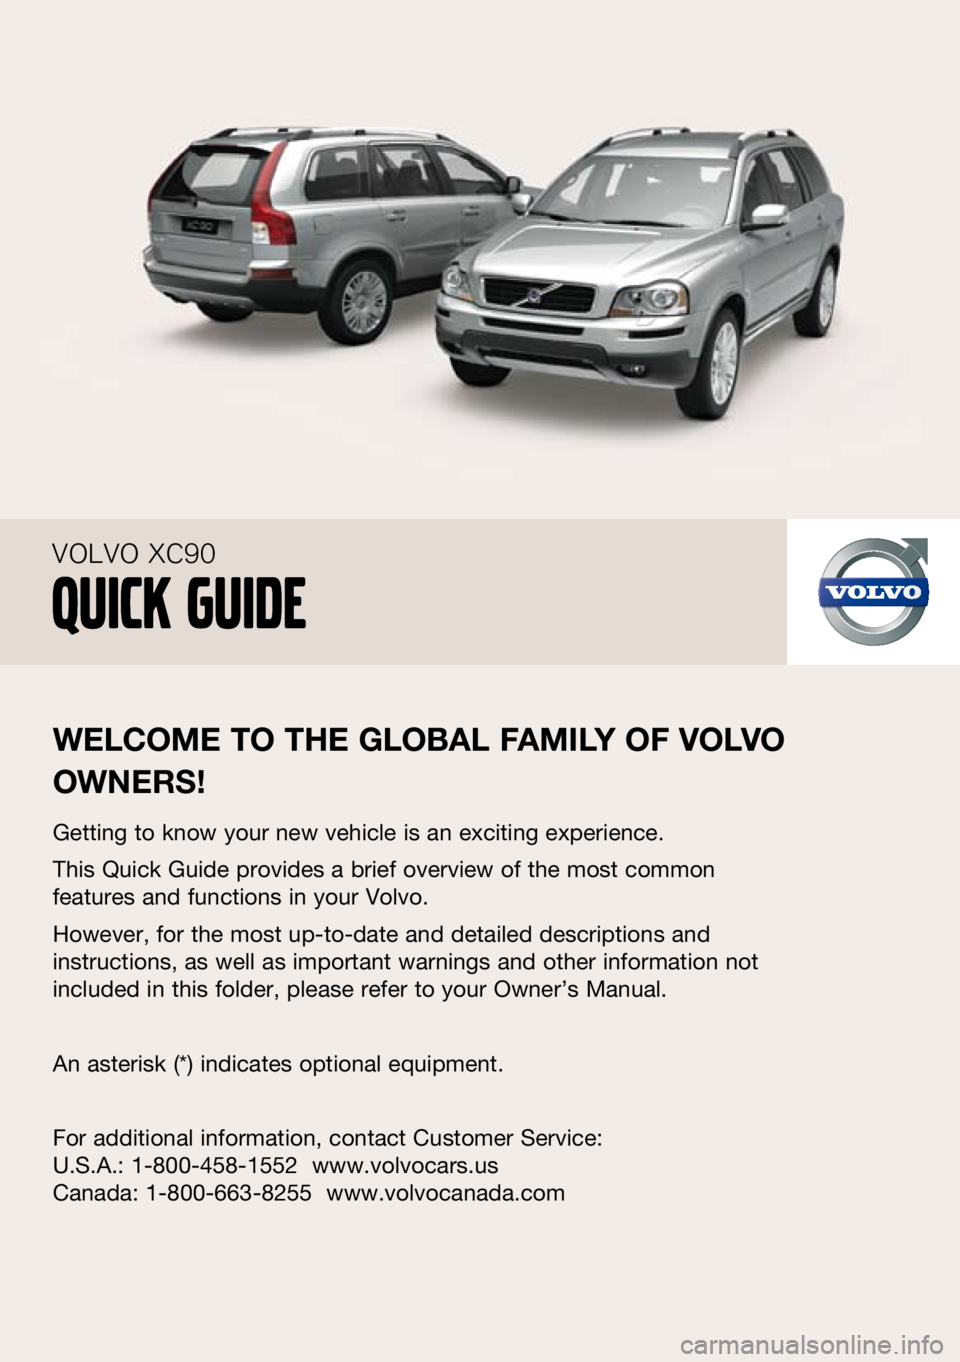 VOLVO XC90 2010  Quick Guide 
welcome to the  global F amily oF  volvo 
owners !
Getting to know your new vehicle is an exciting experience.
This Quick Guide provides a brief overview of the most common 
features and functions in